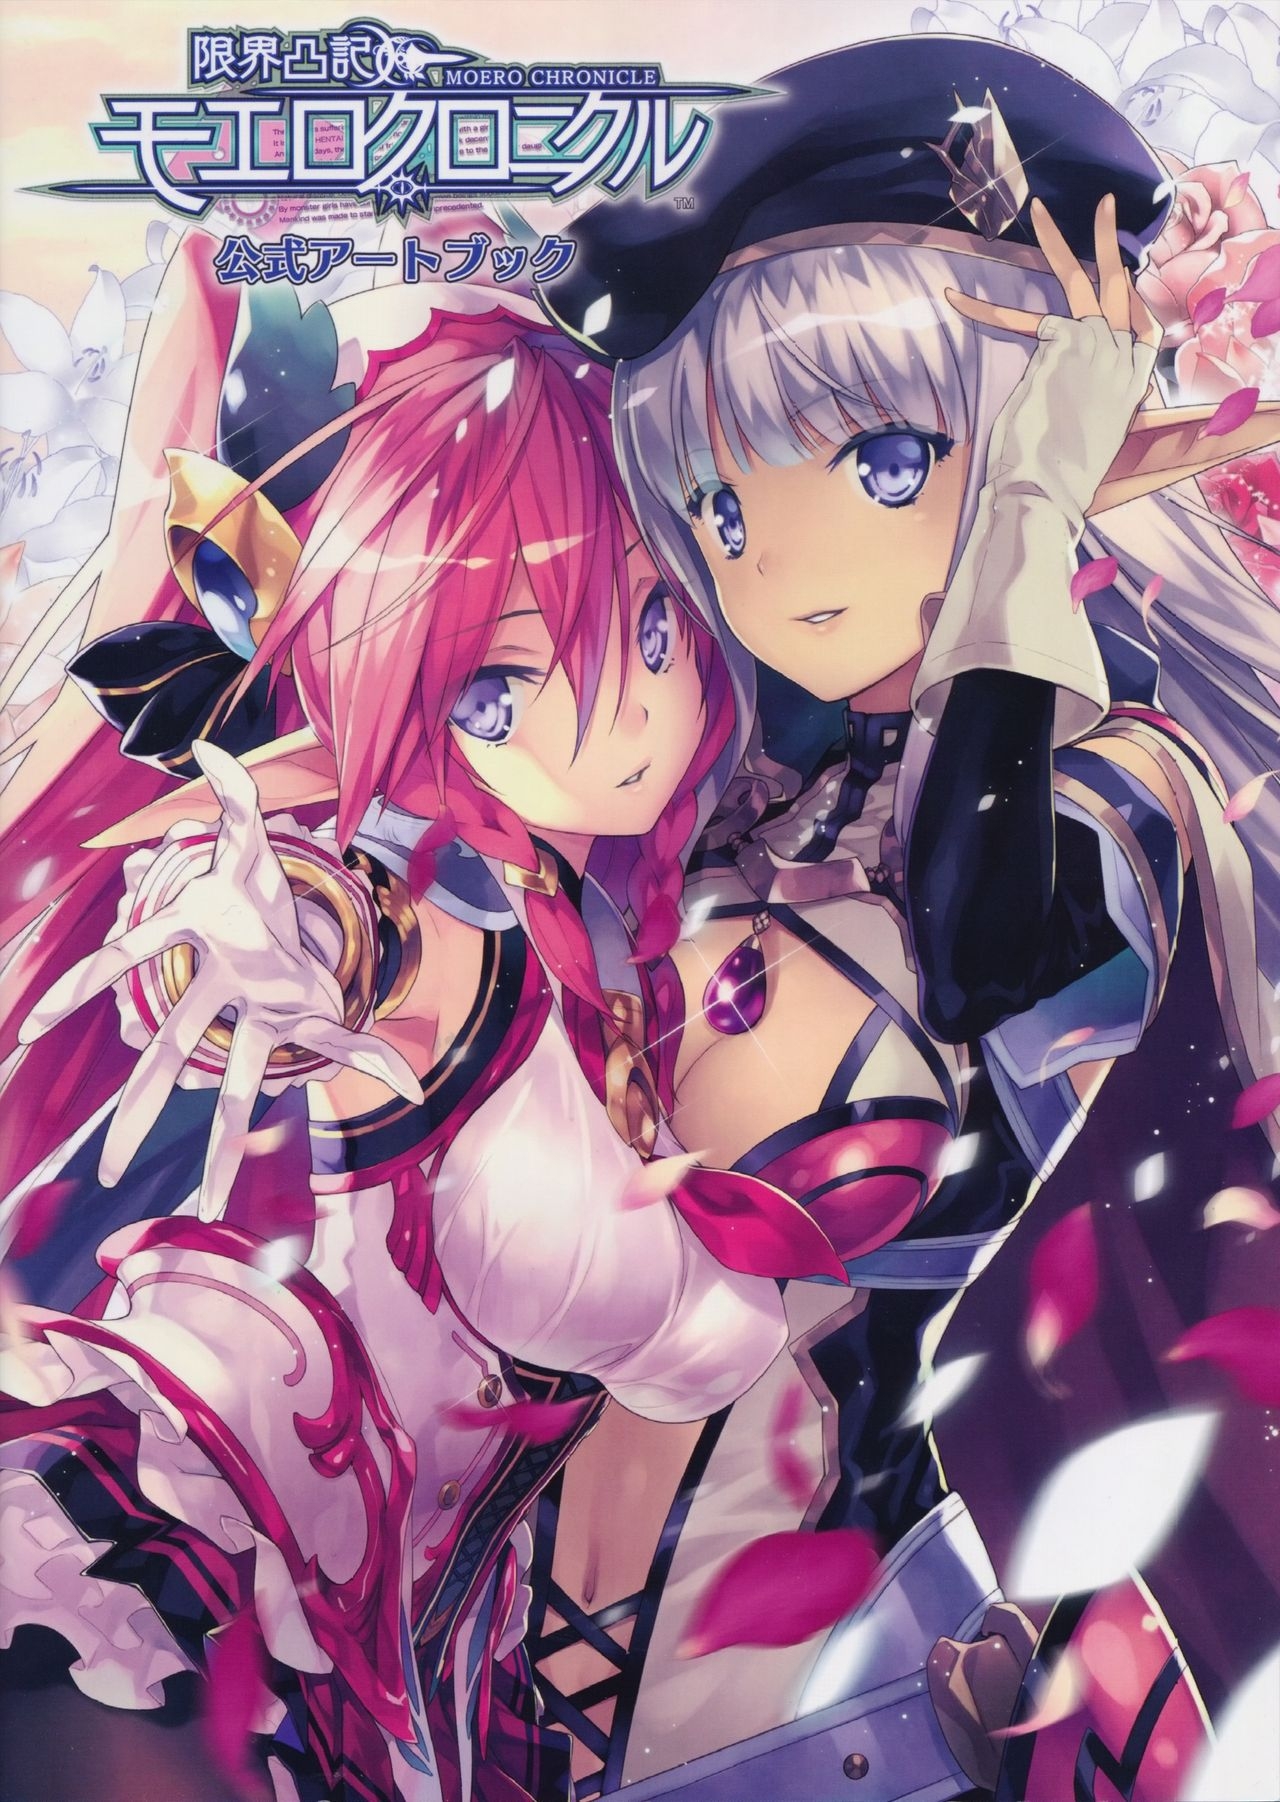 Moero Chronicle official art book 0